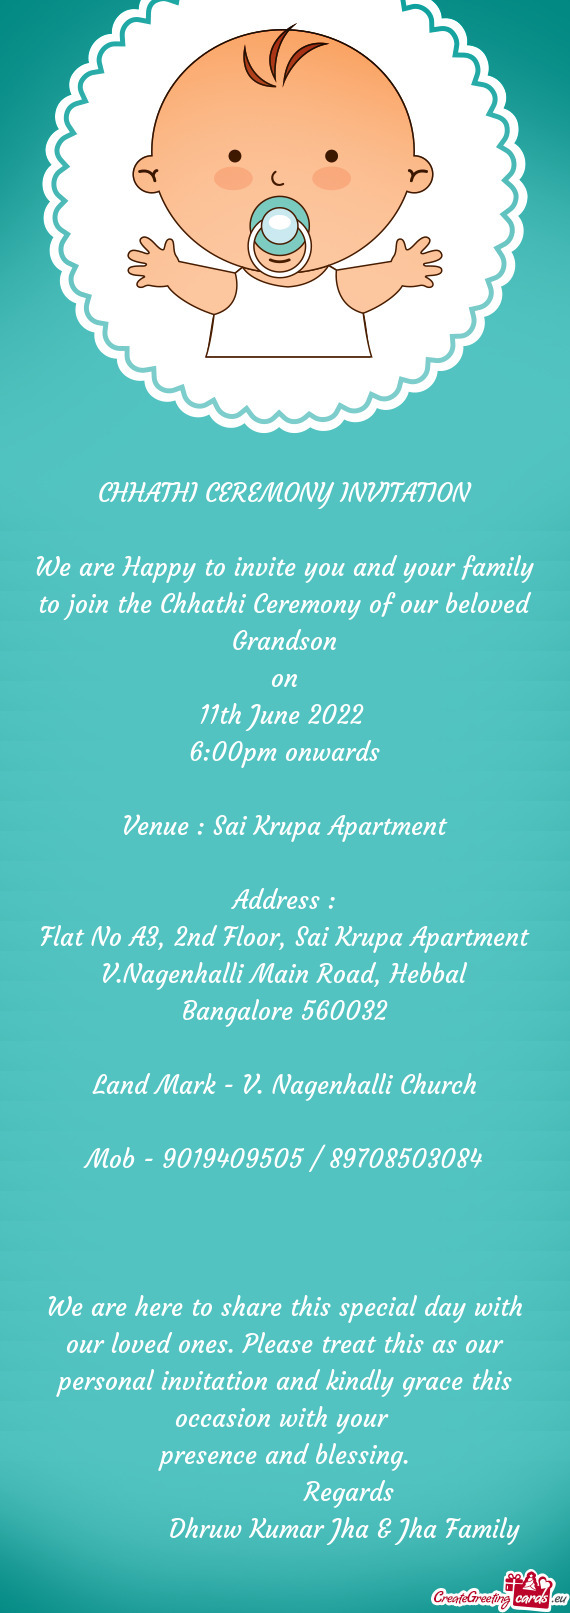 We are Happy to invite you and your family to join the Chhathi Ceremony of our beloved Grandson